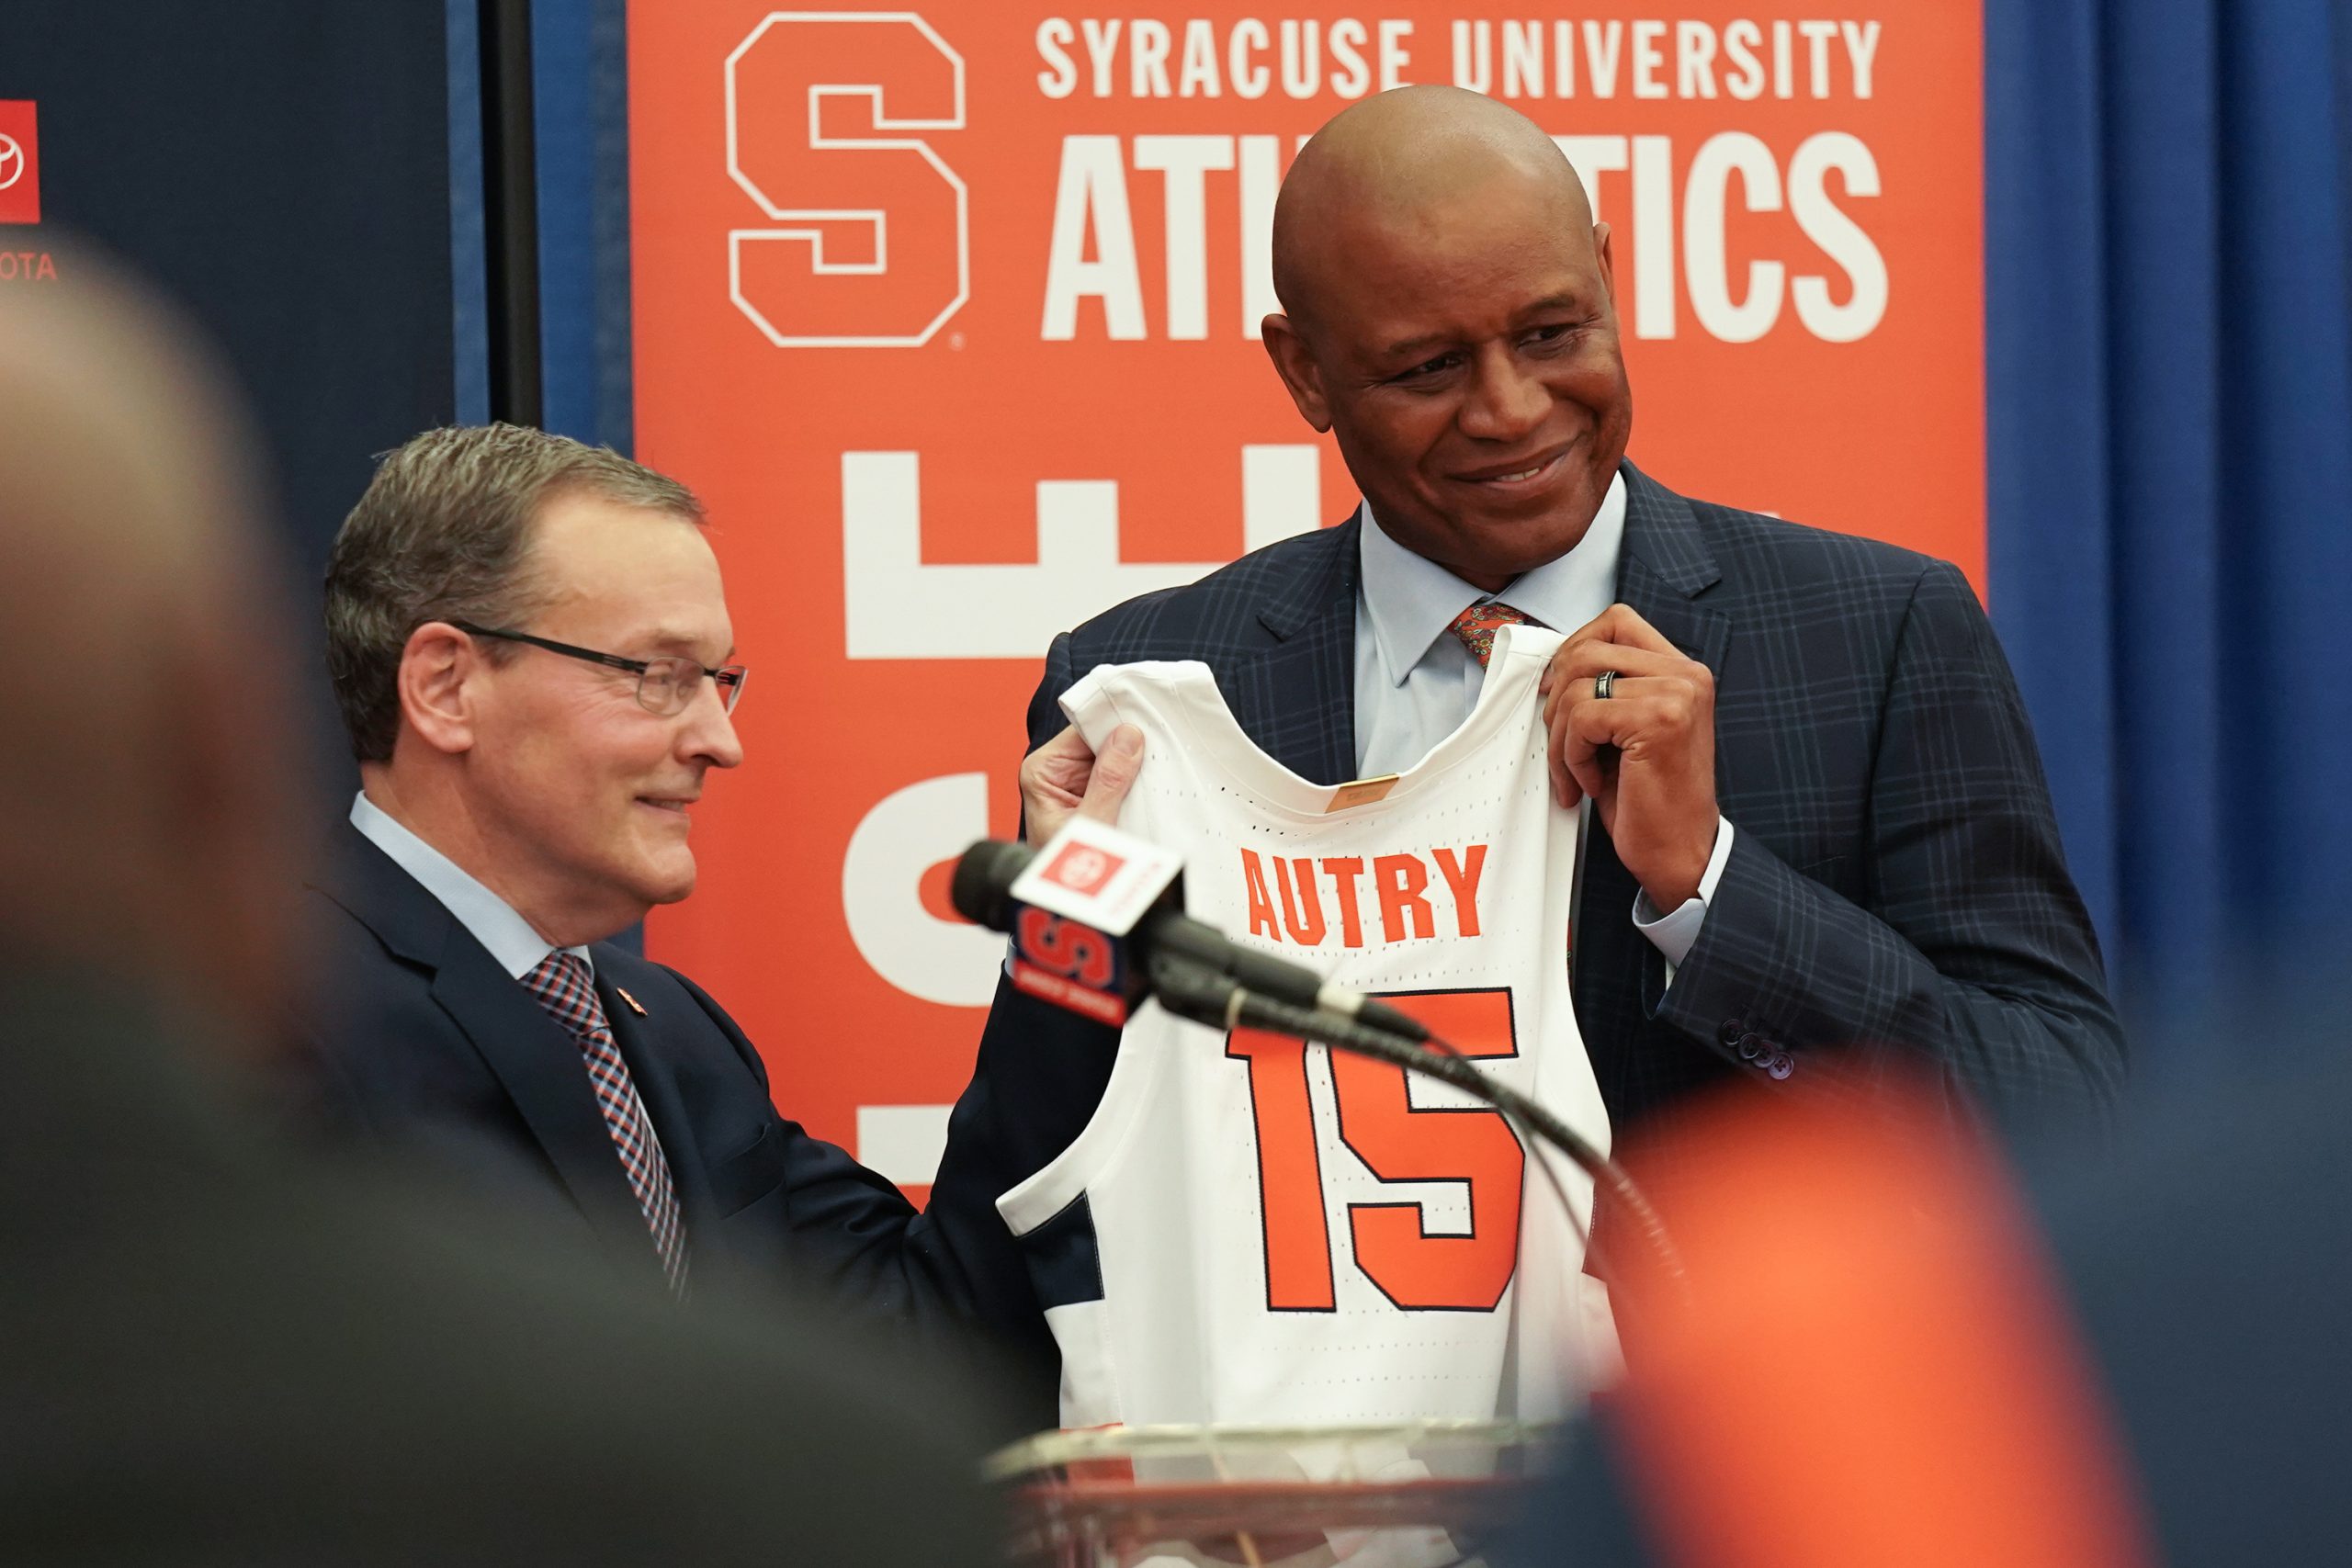 Syracuse Head Coach Adrian Autry holds up his jersey during a press conference on Friday, March 10, 2023 in the Carmelo K. Anthony Basketball Center. Photo by Joseph Martino.